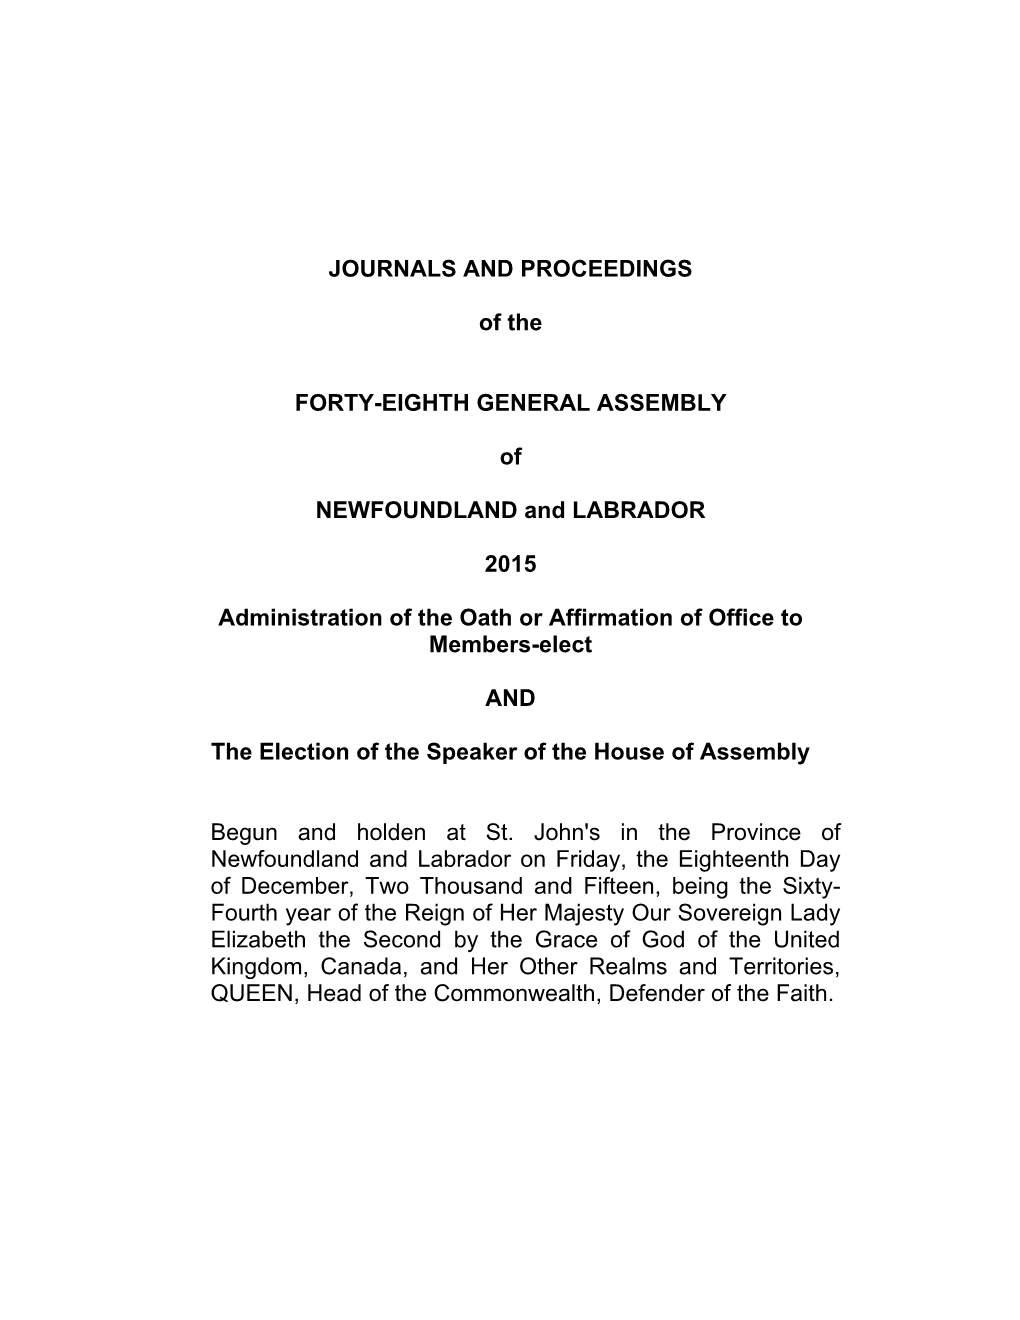 JOURNALS and PROCEEDINGS of the FORTY